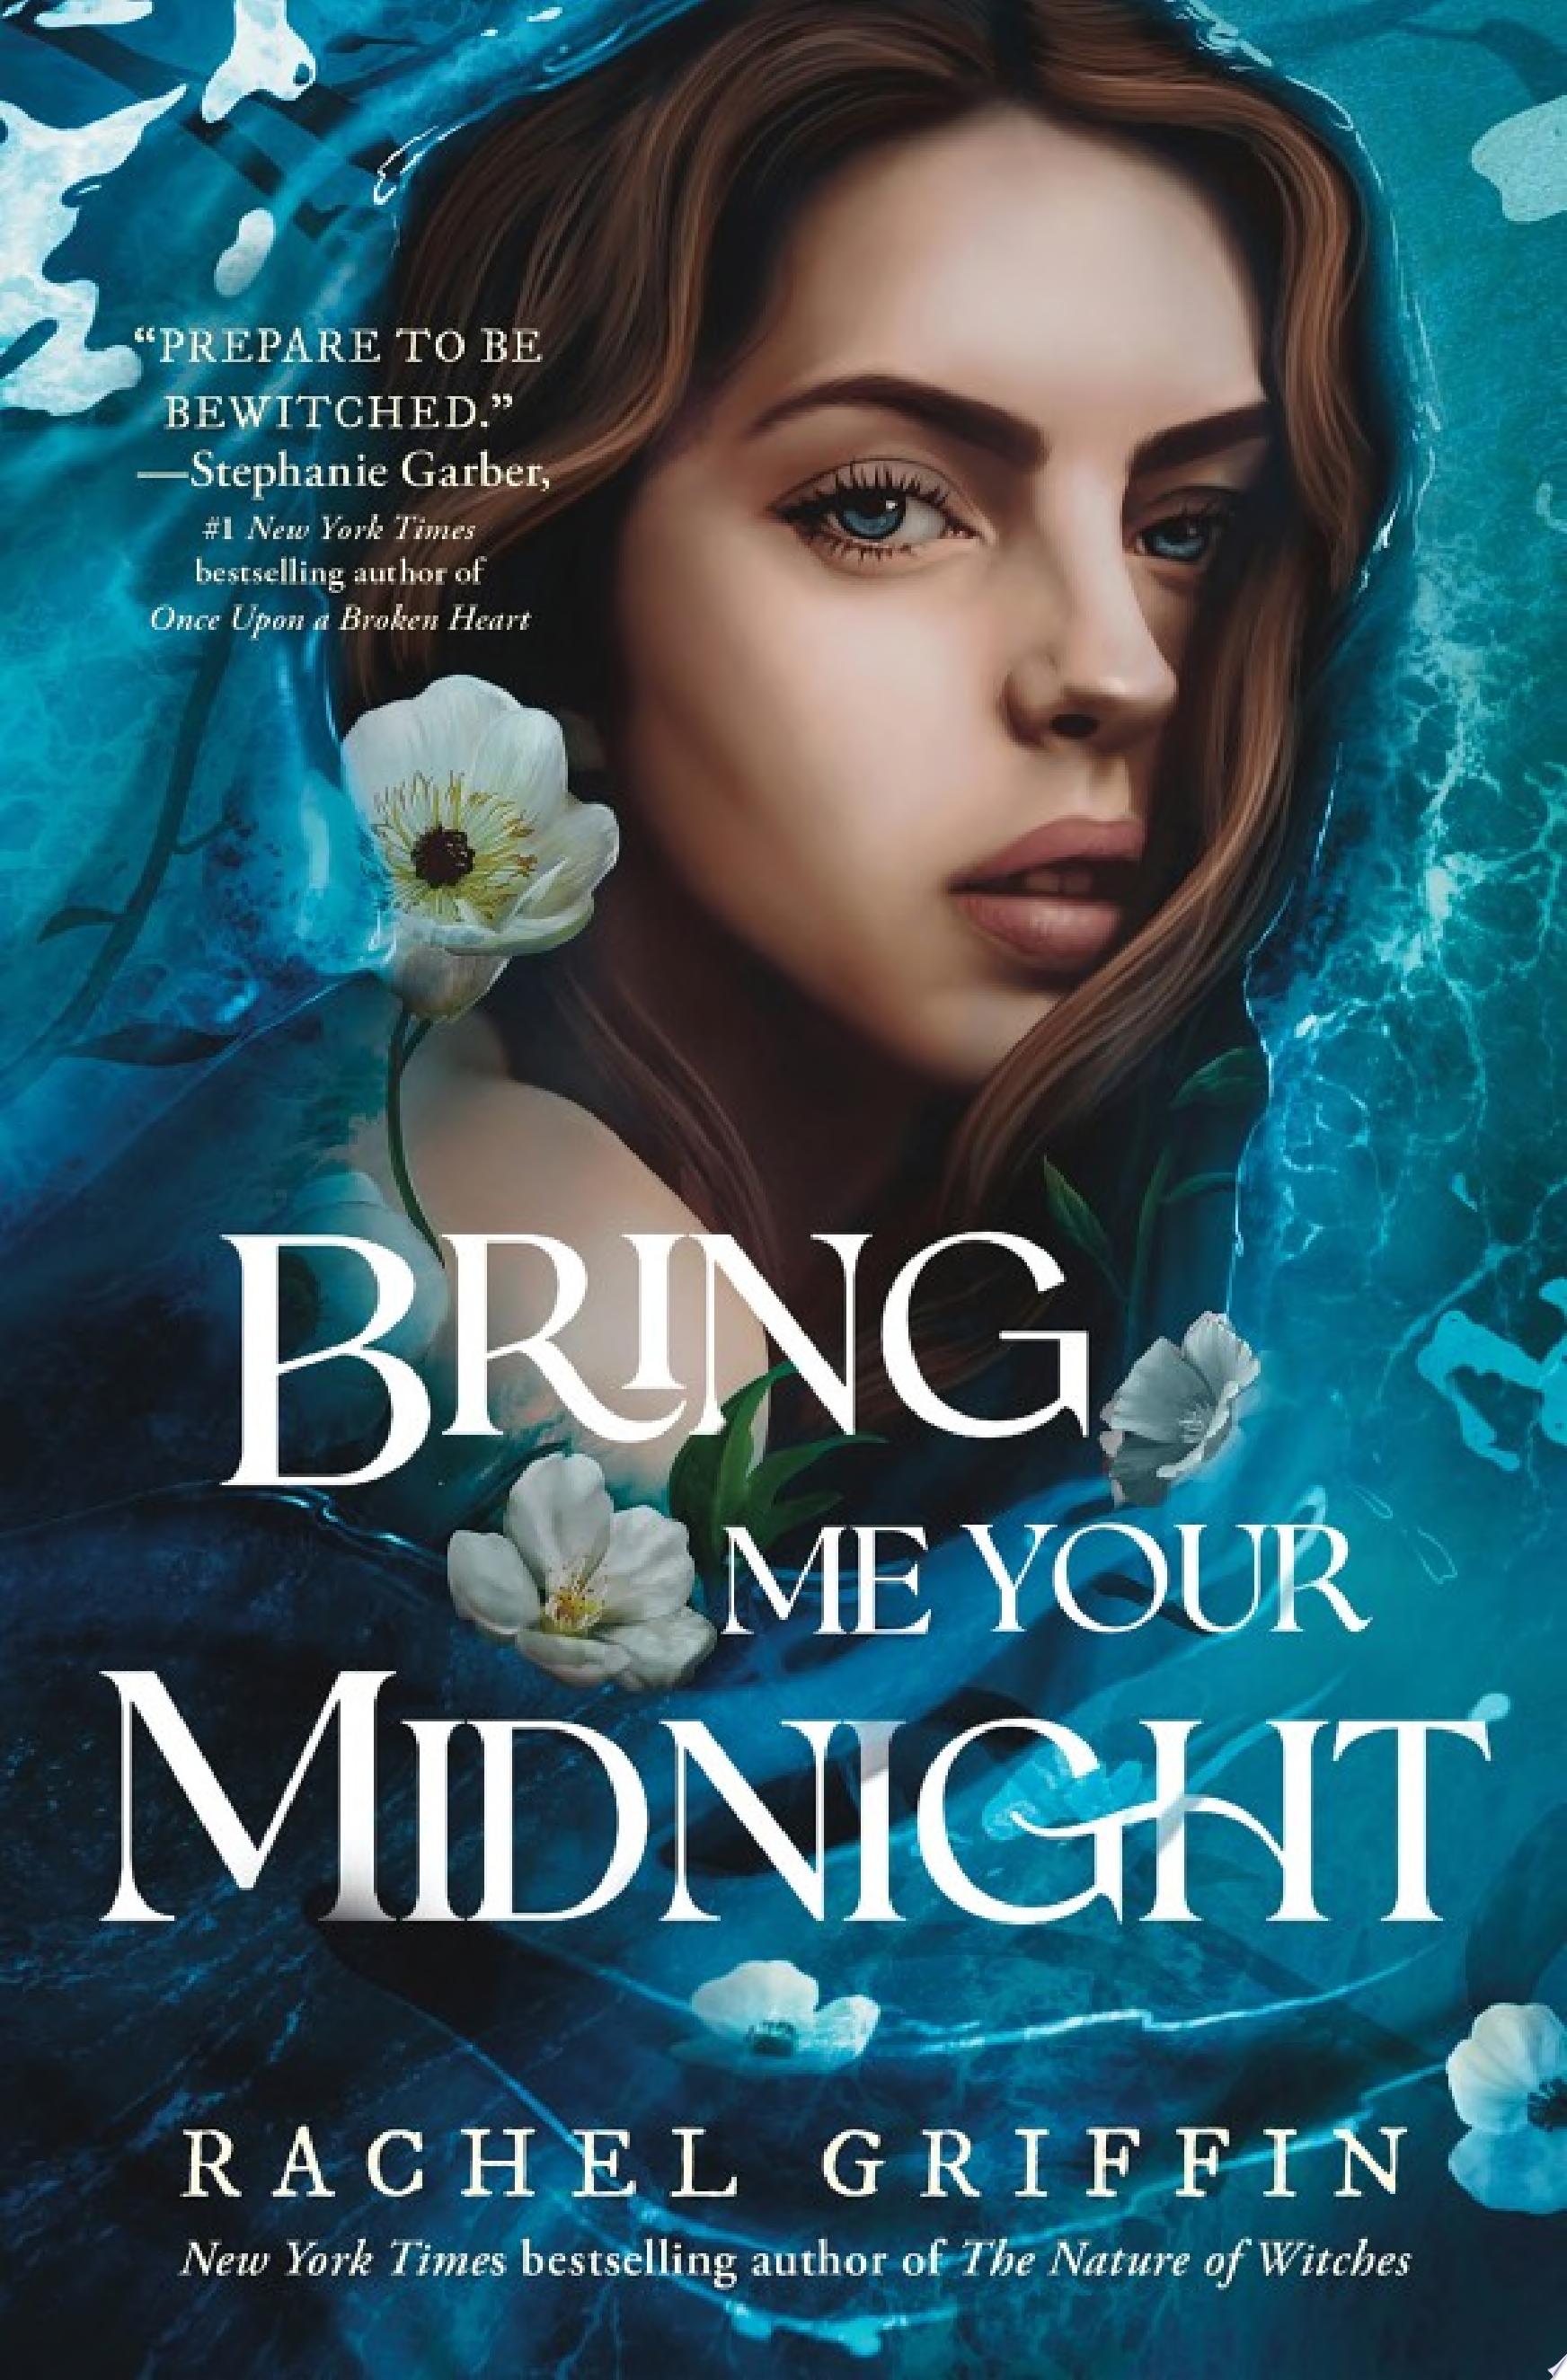 Image for "Bring Me Your Midnight"